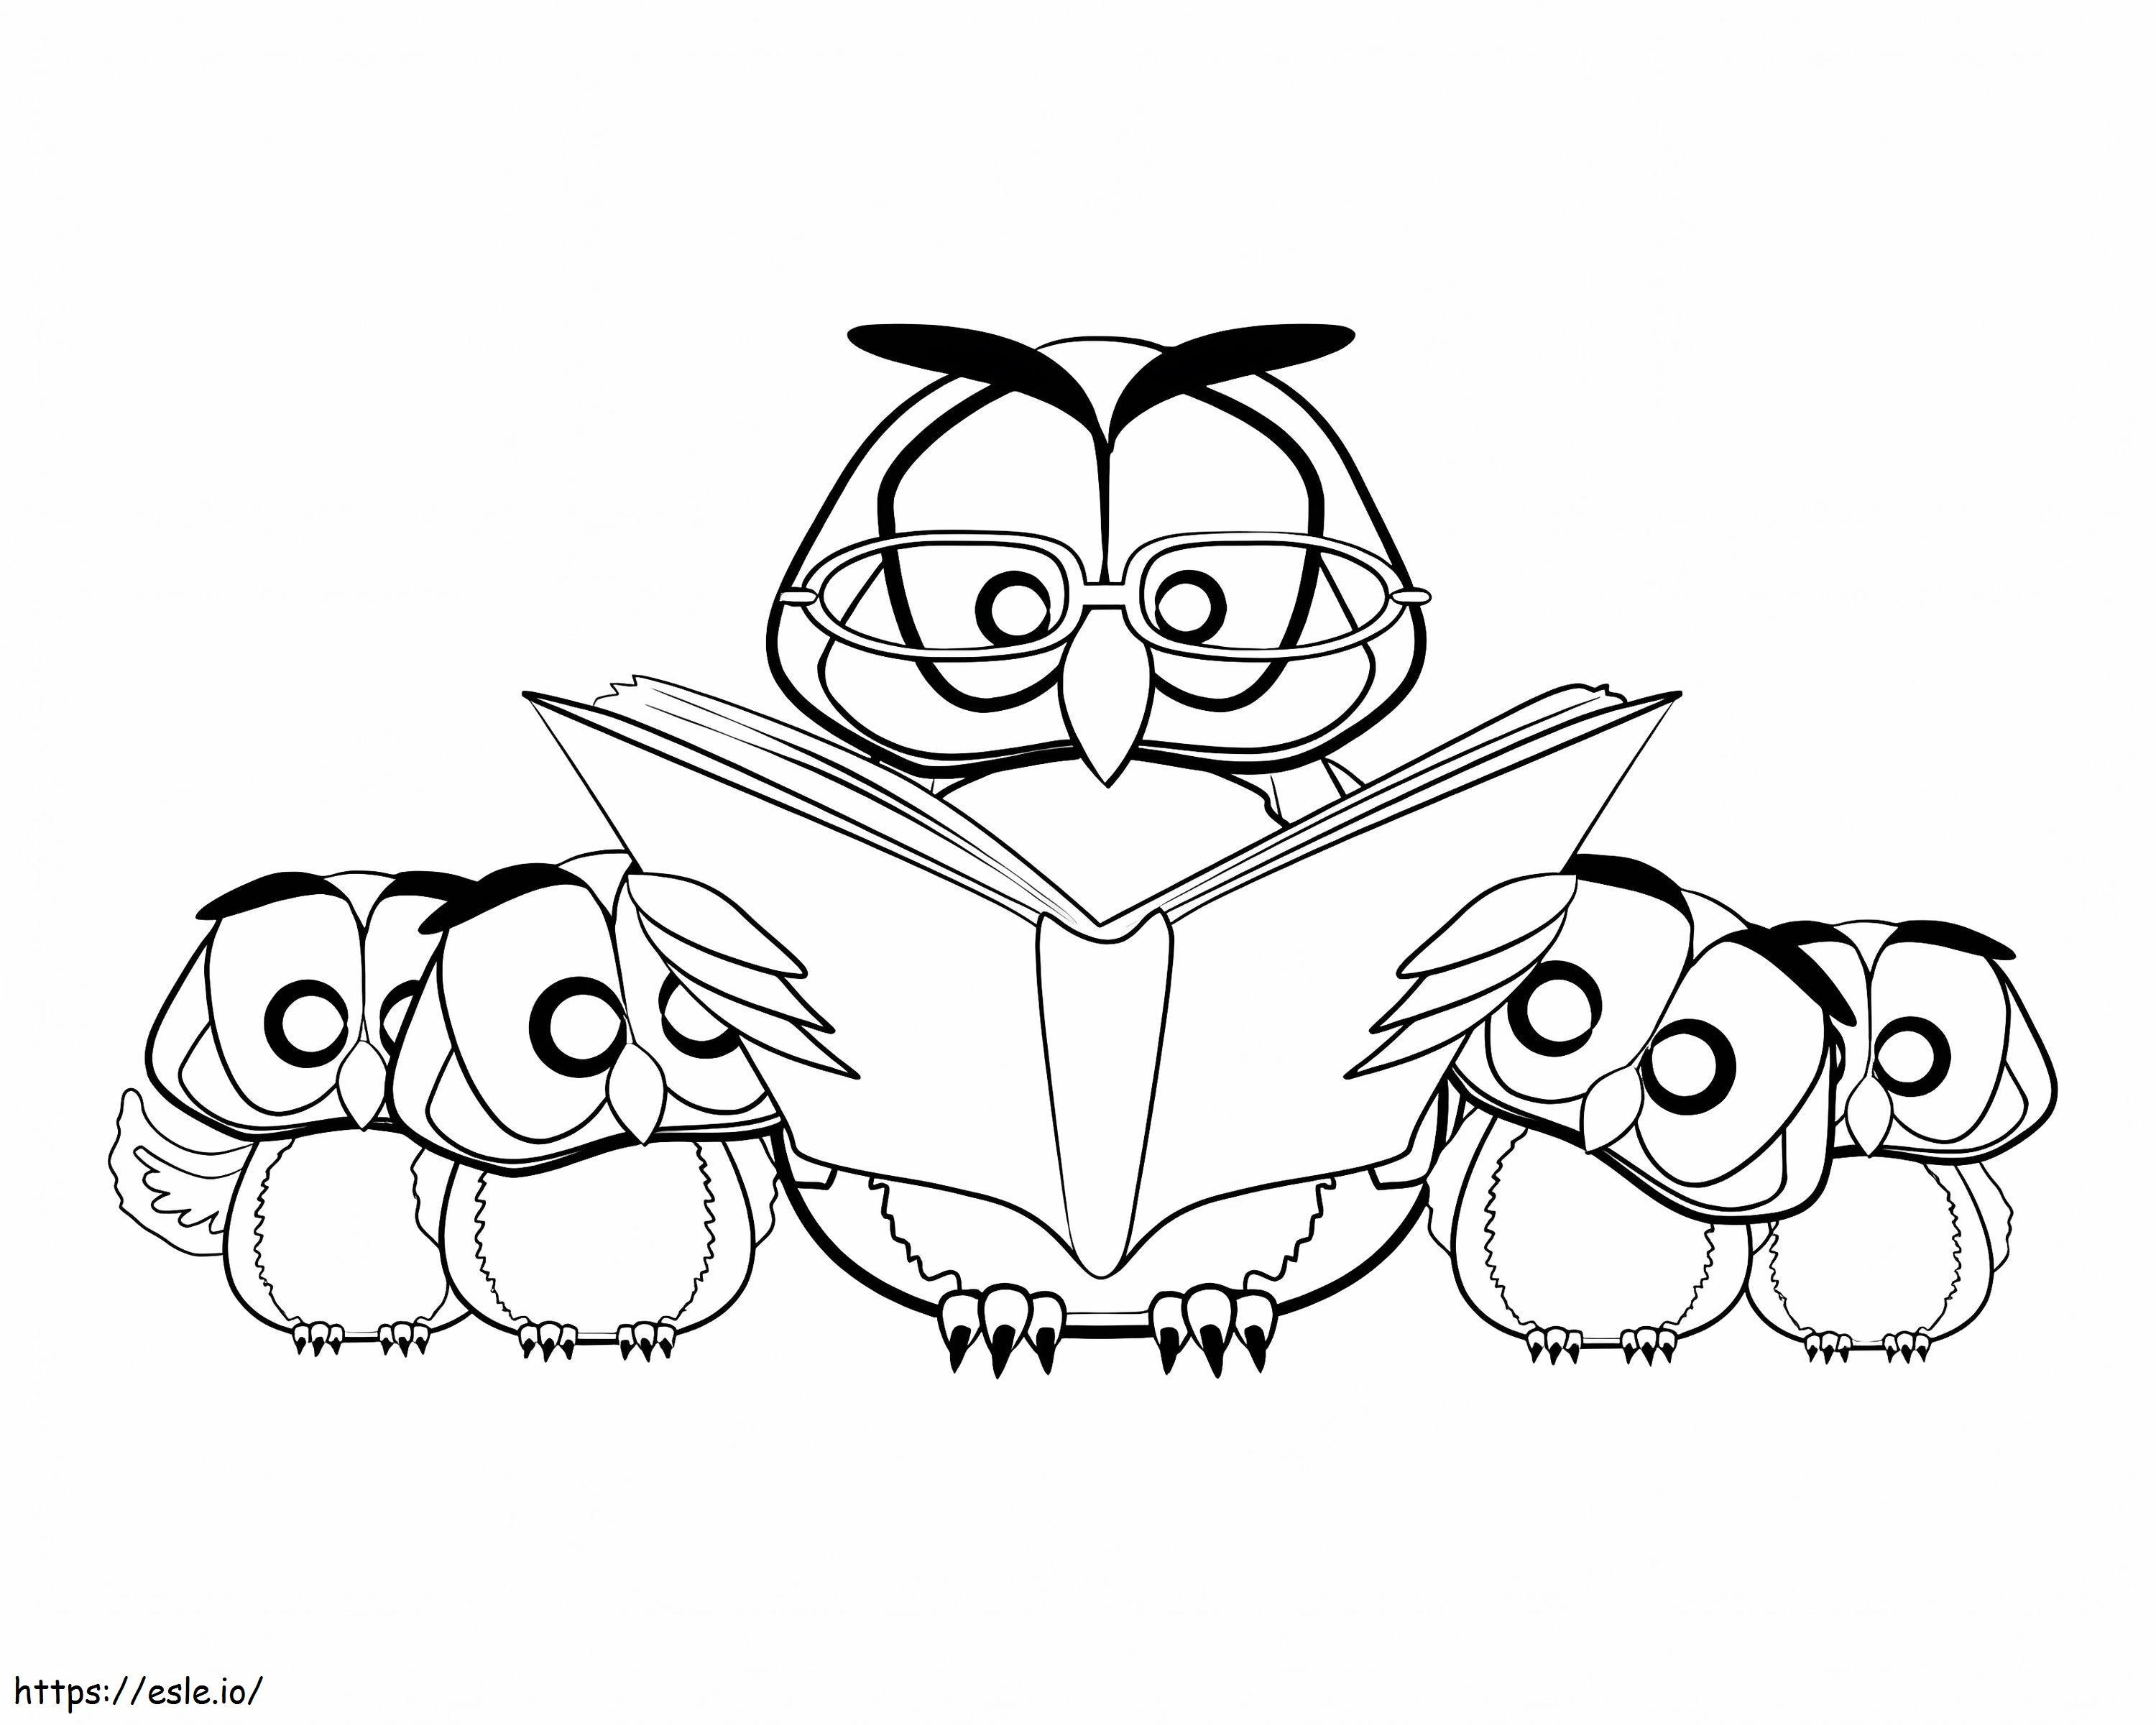 Owl Class coloring page